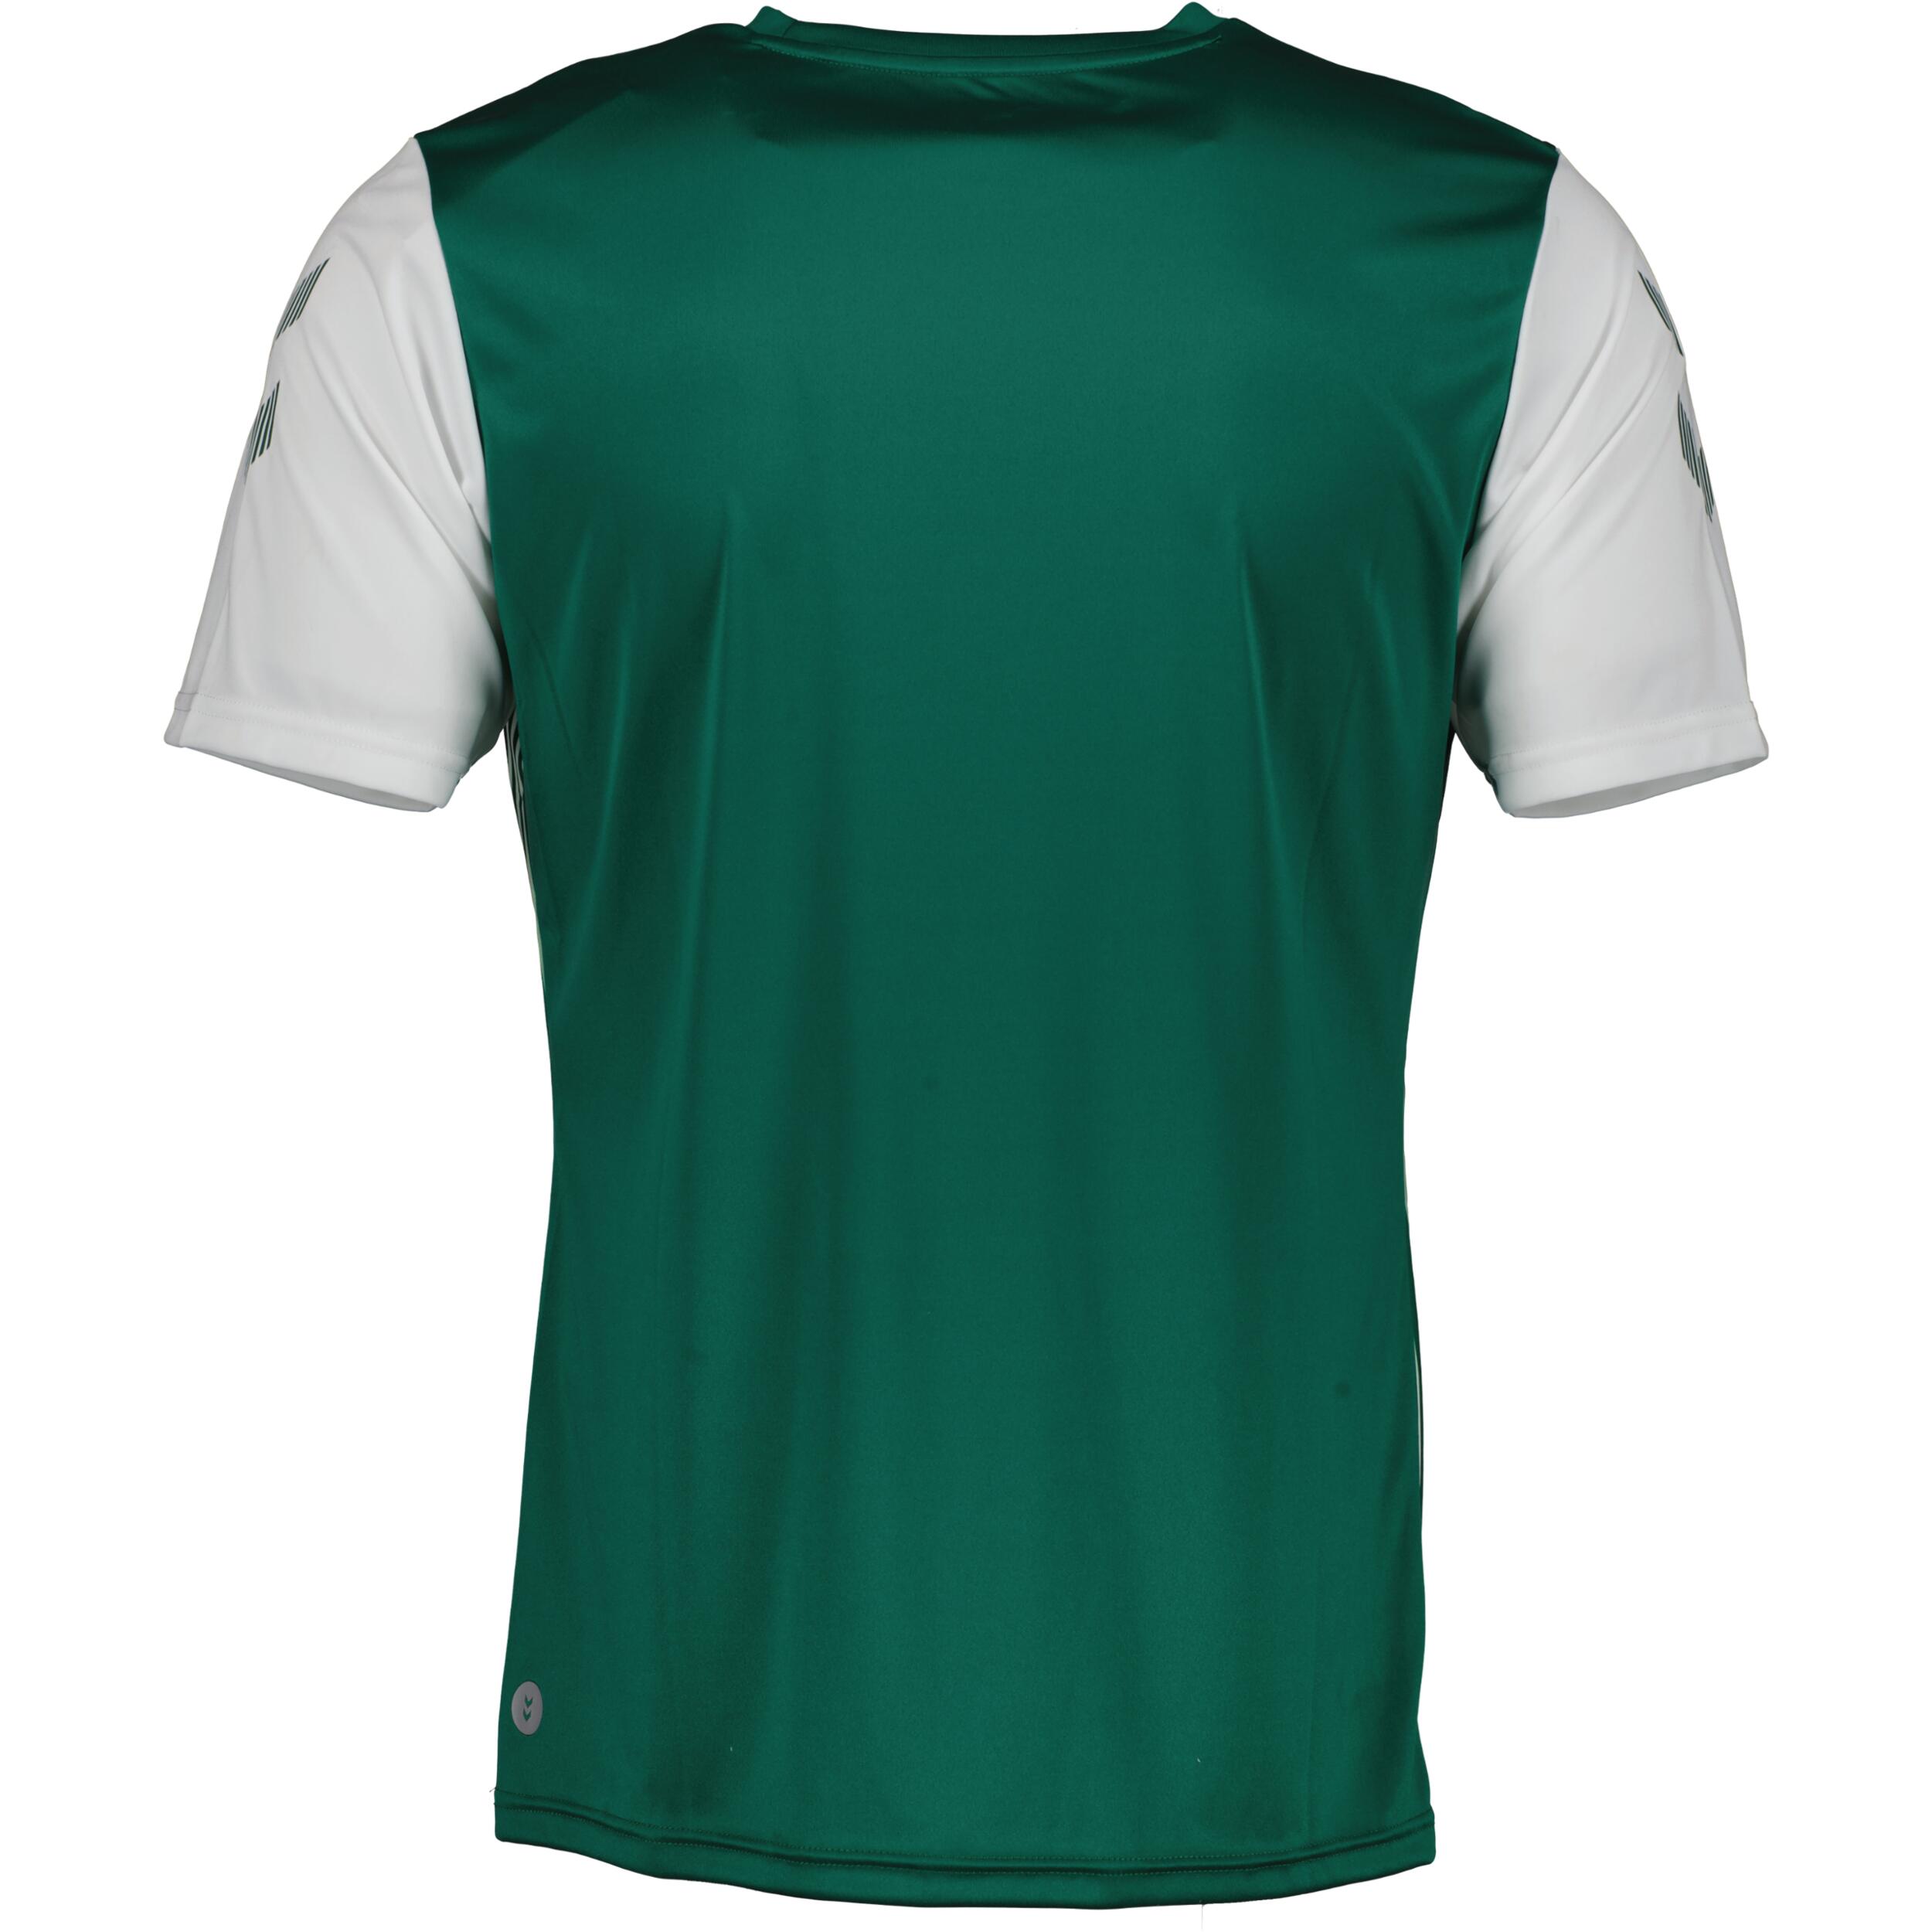 Mexico jersey for kids, great for football, in evergreen/white 2/3